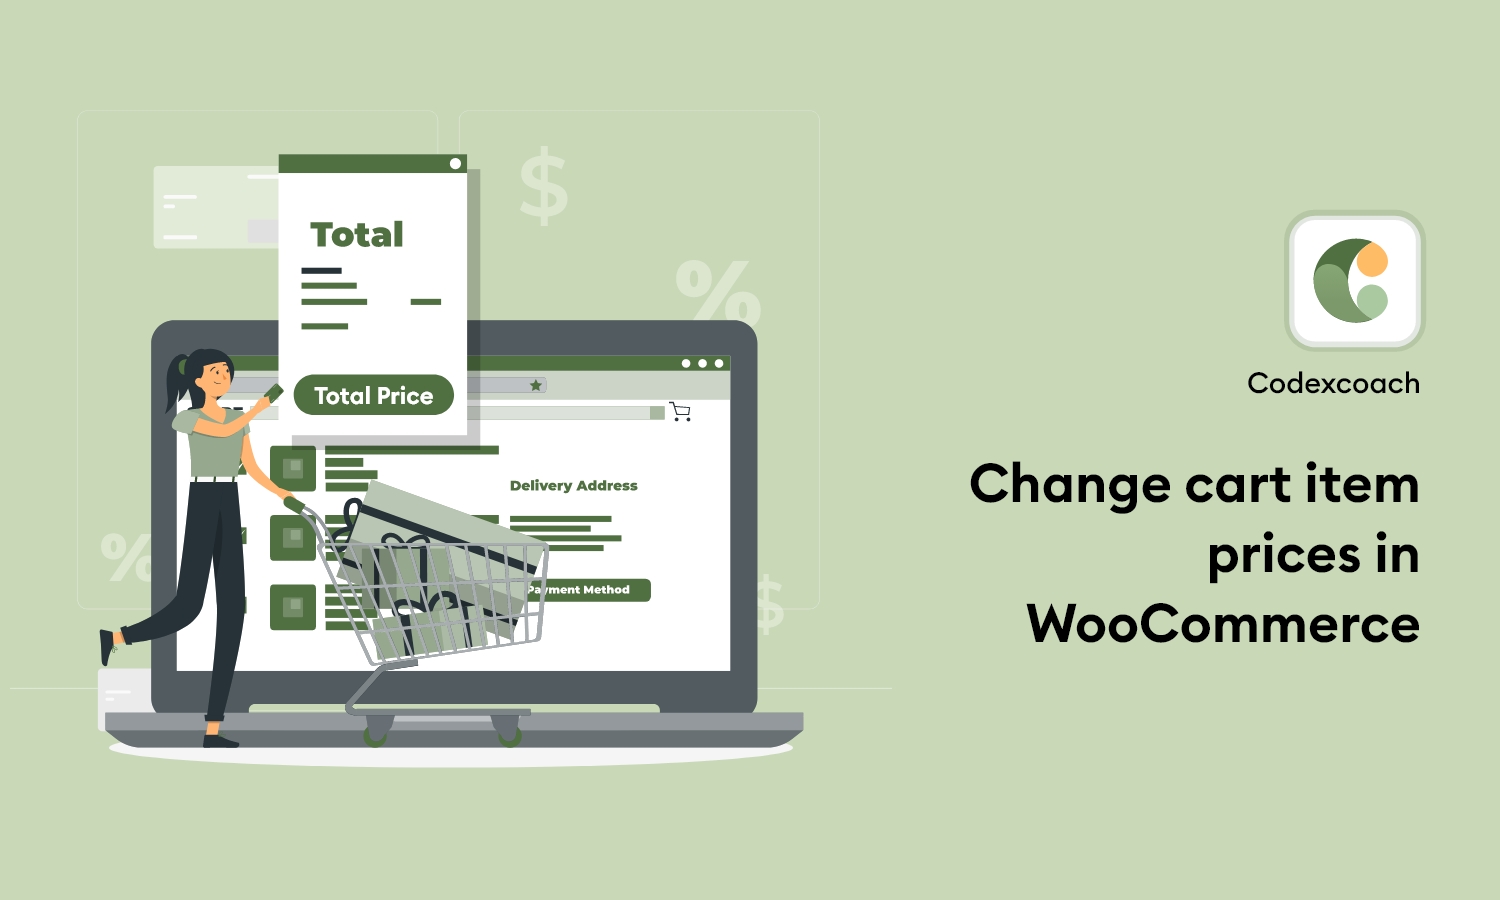 Change cart item prices in WooCommerce